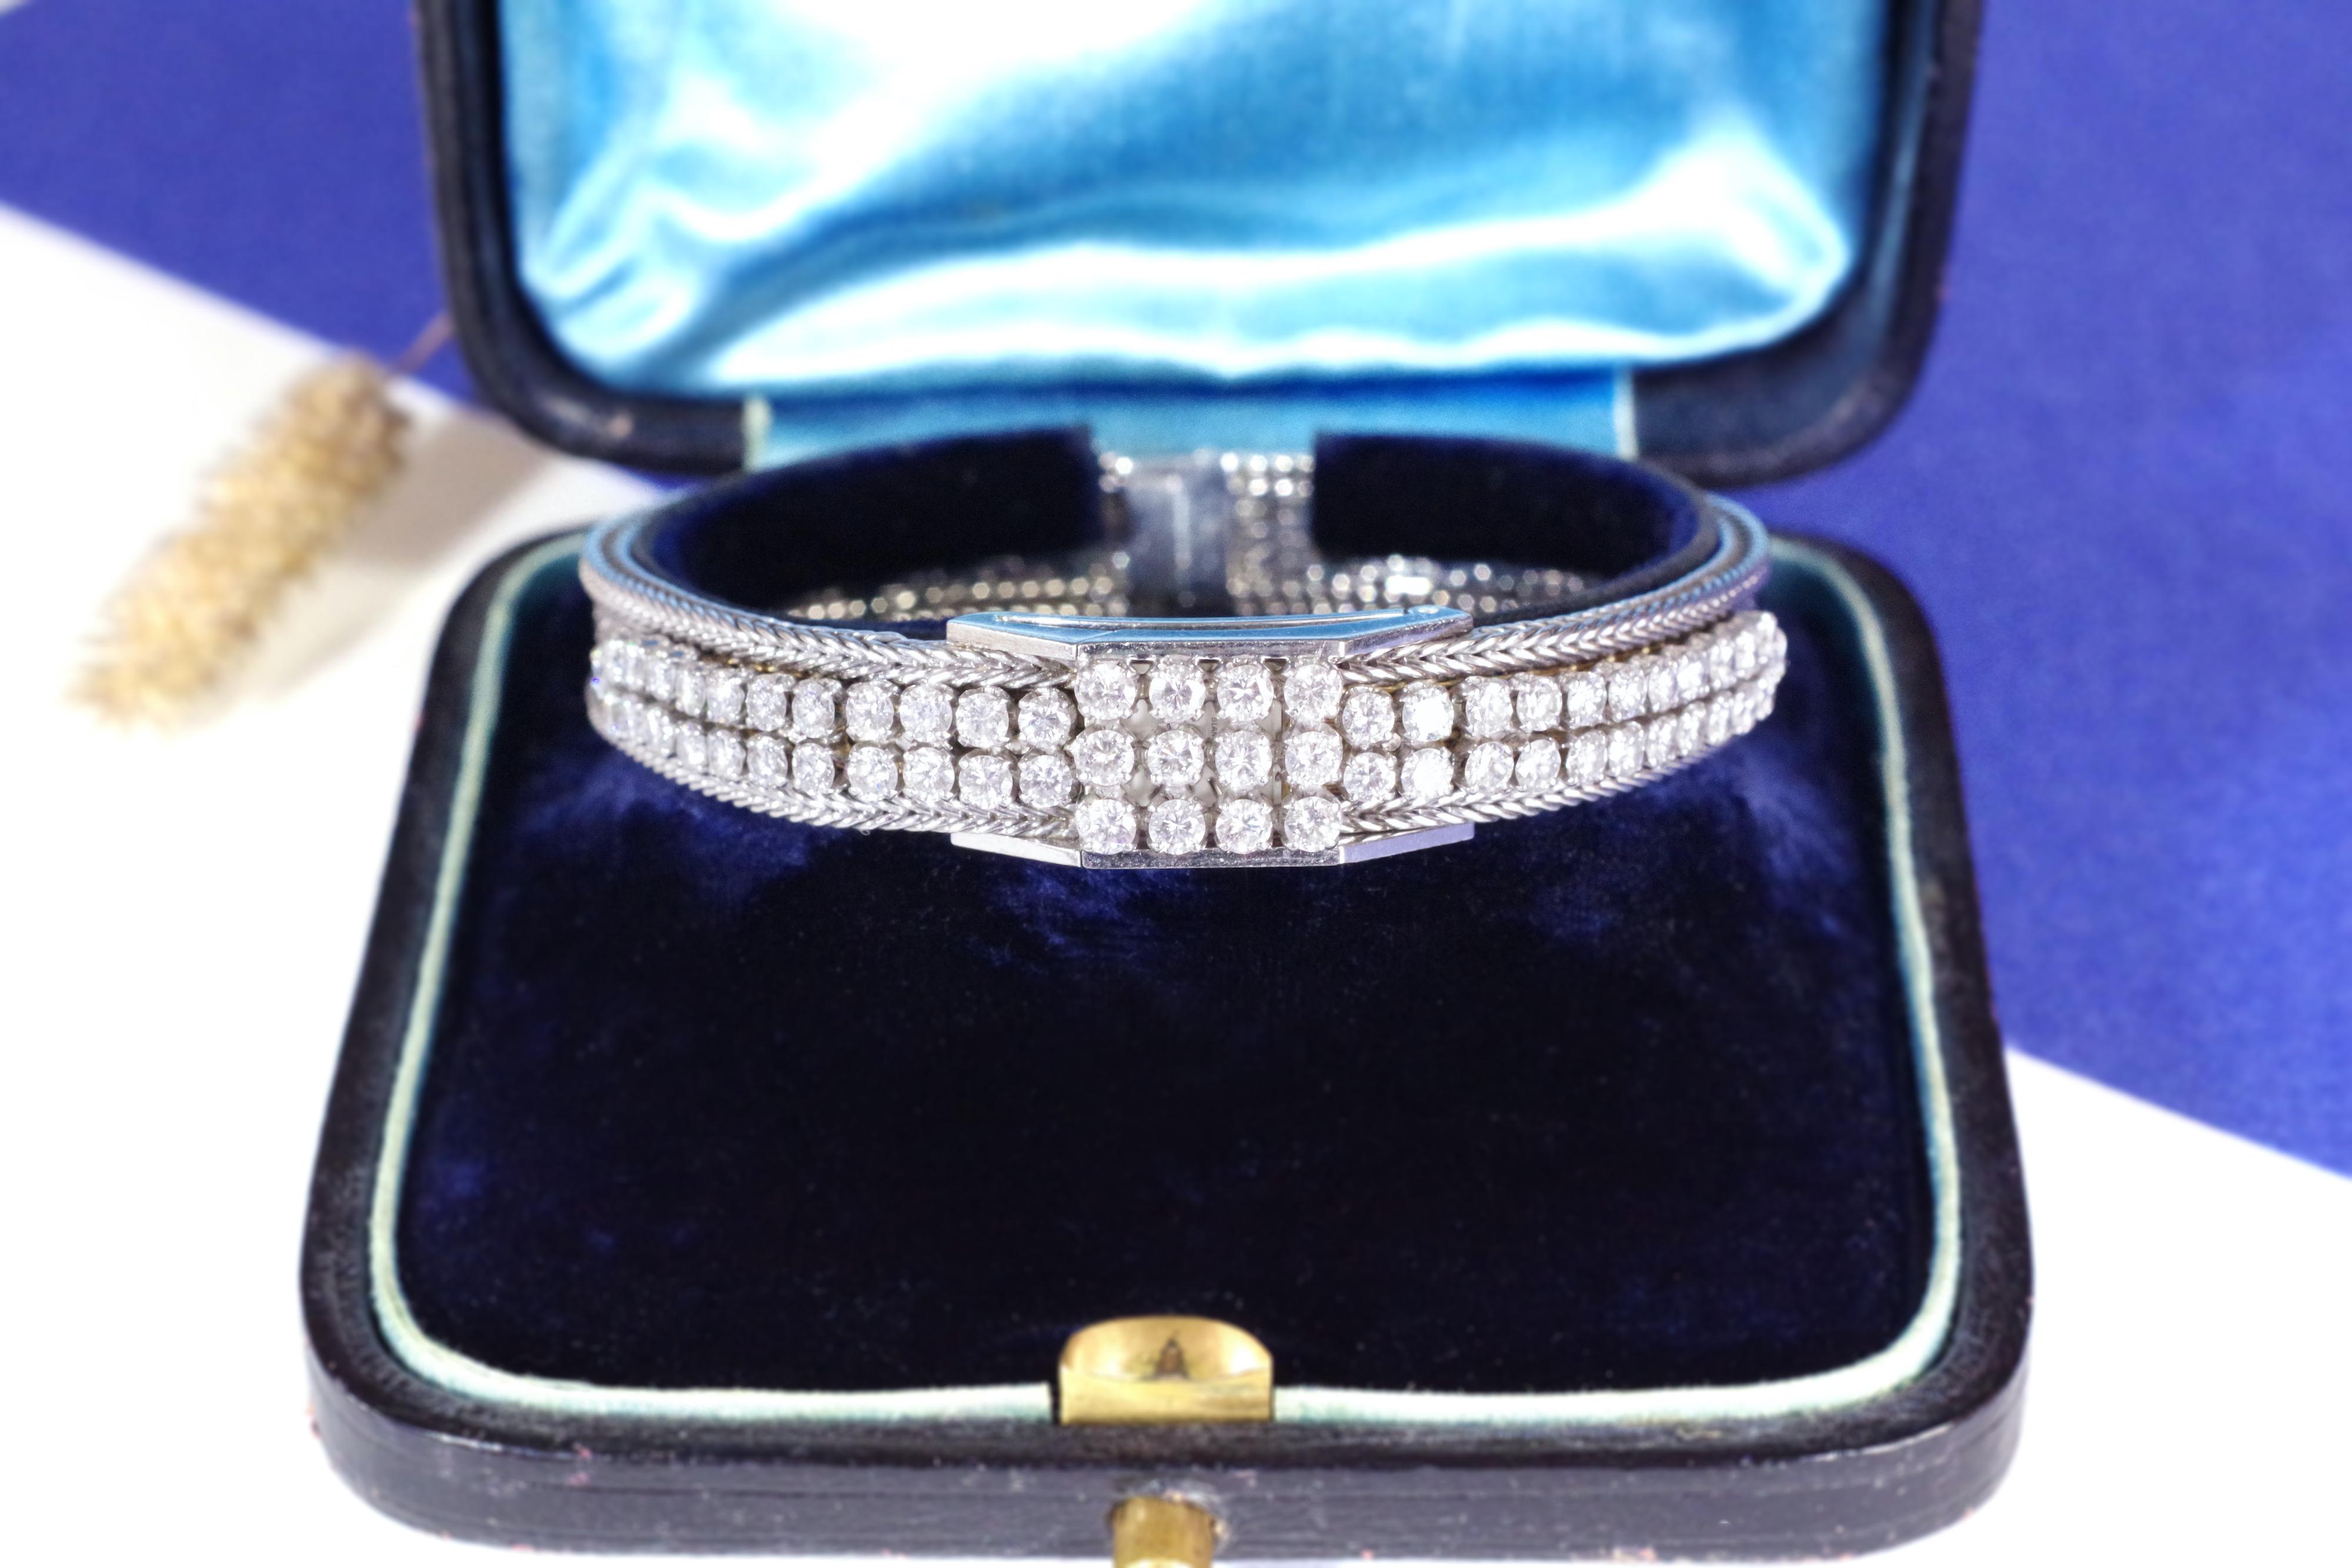 Lady Bracelet Diamond Concealed Watch by Blancpain, 18k Gold and Platinum, 1970 For Sale 3